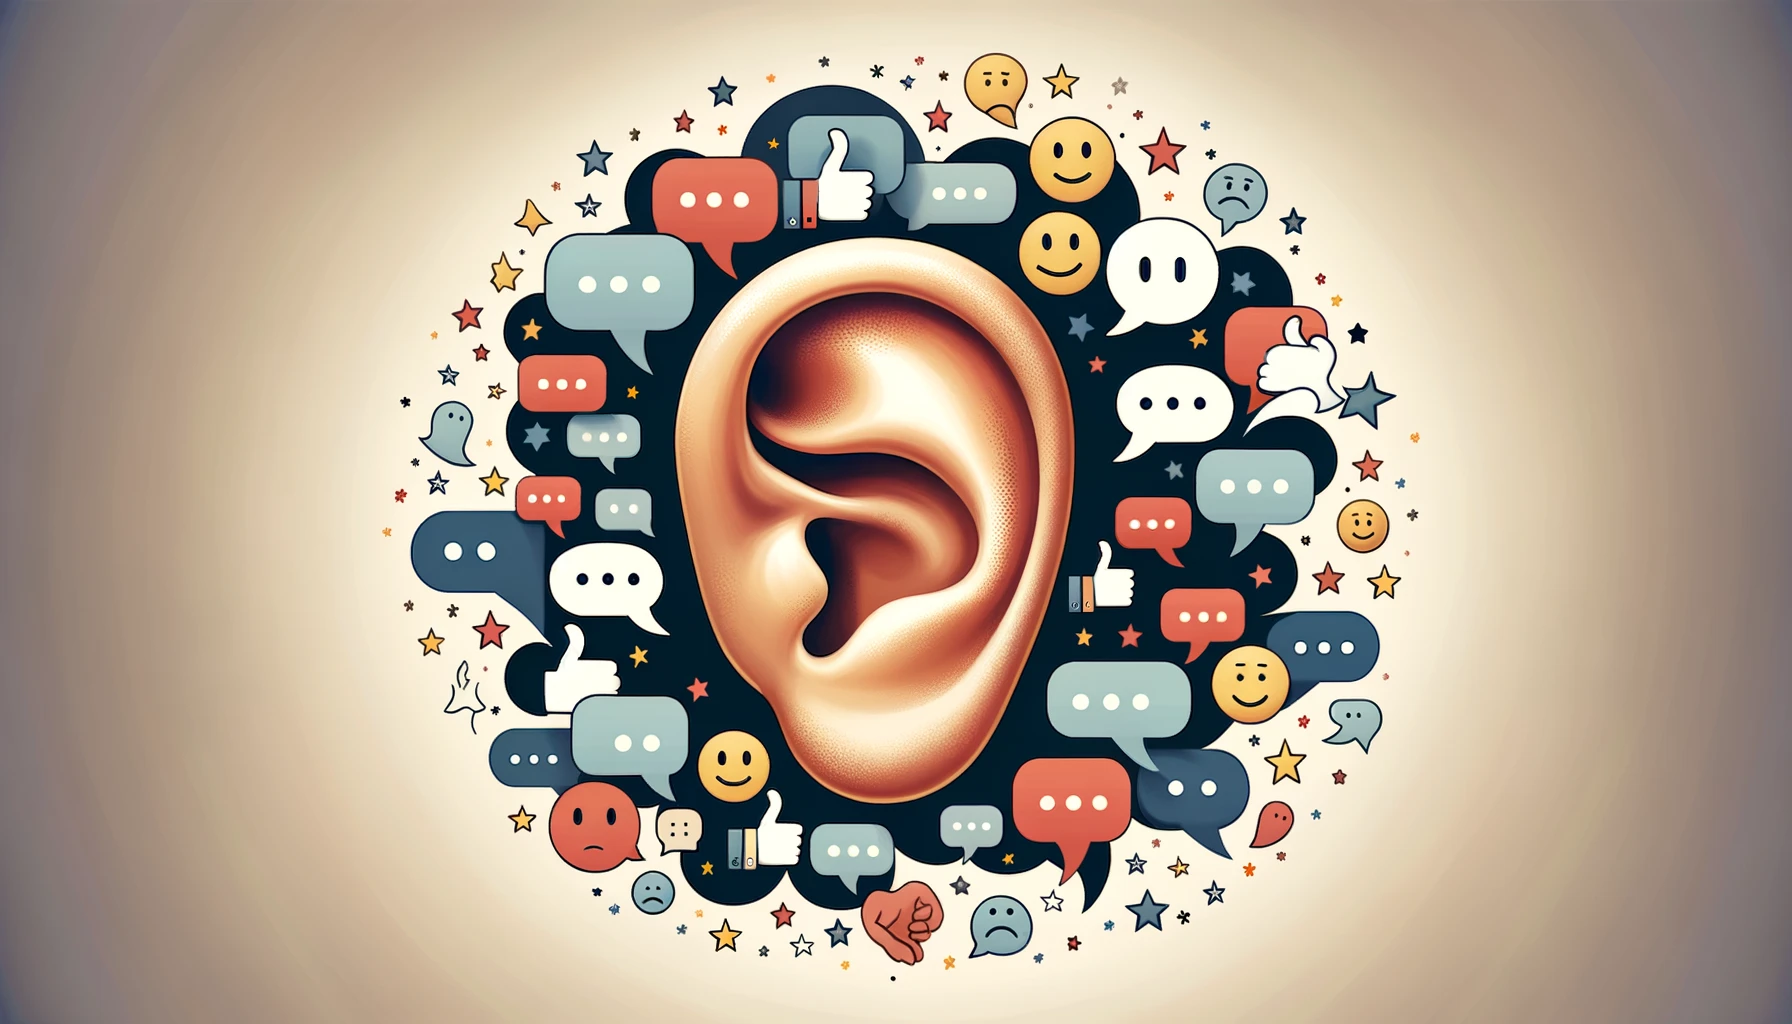 An ear centered in a wide image, surrounded by speech bubbles containing symbols of online customer feedback. Scattered around are thumbs up, thumbs down, smiley faces, and frowny faces, illustrating a company's movement towards customer feedback innovation for product innovation and customer-driven development.